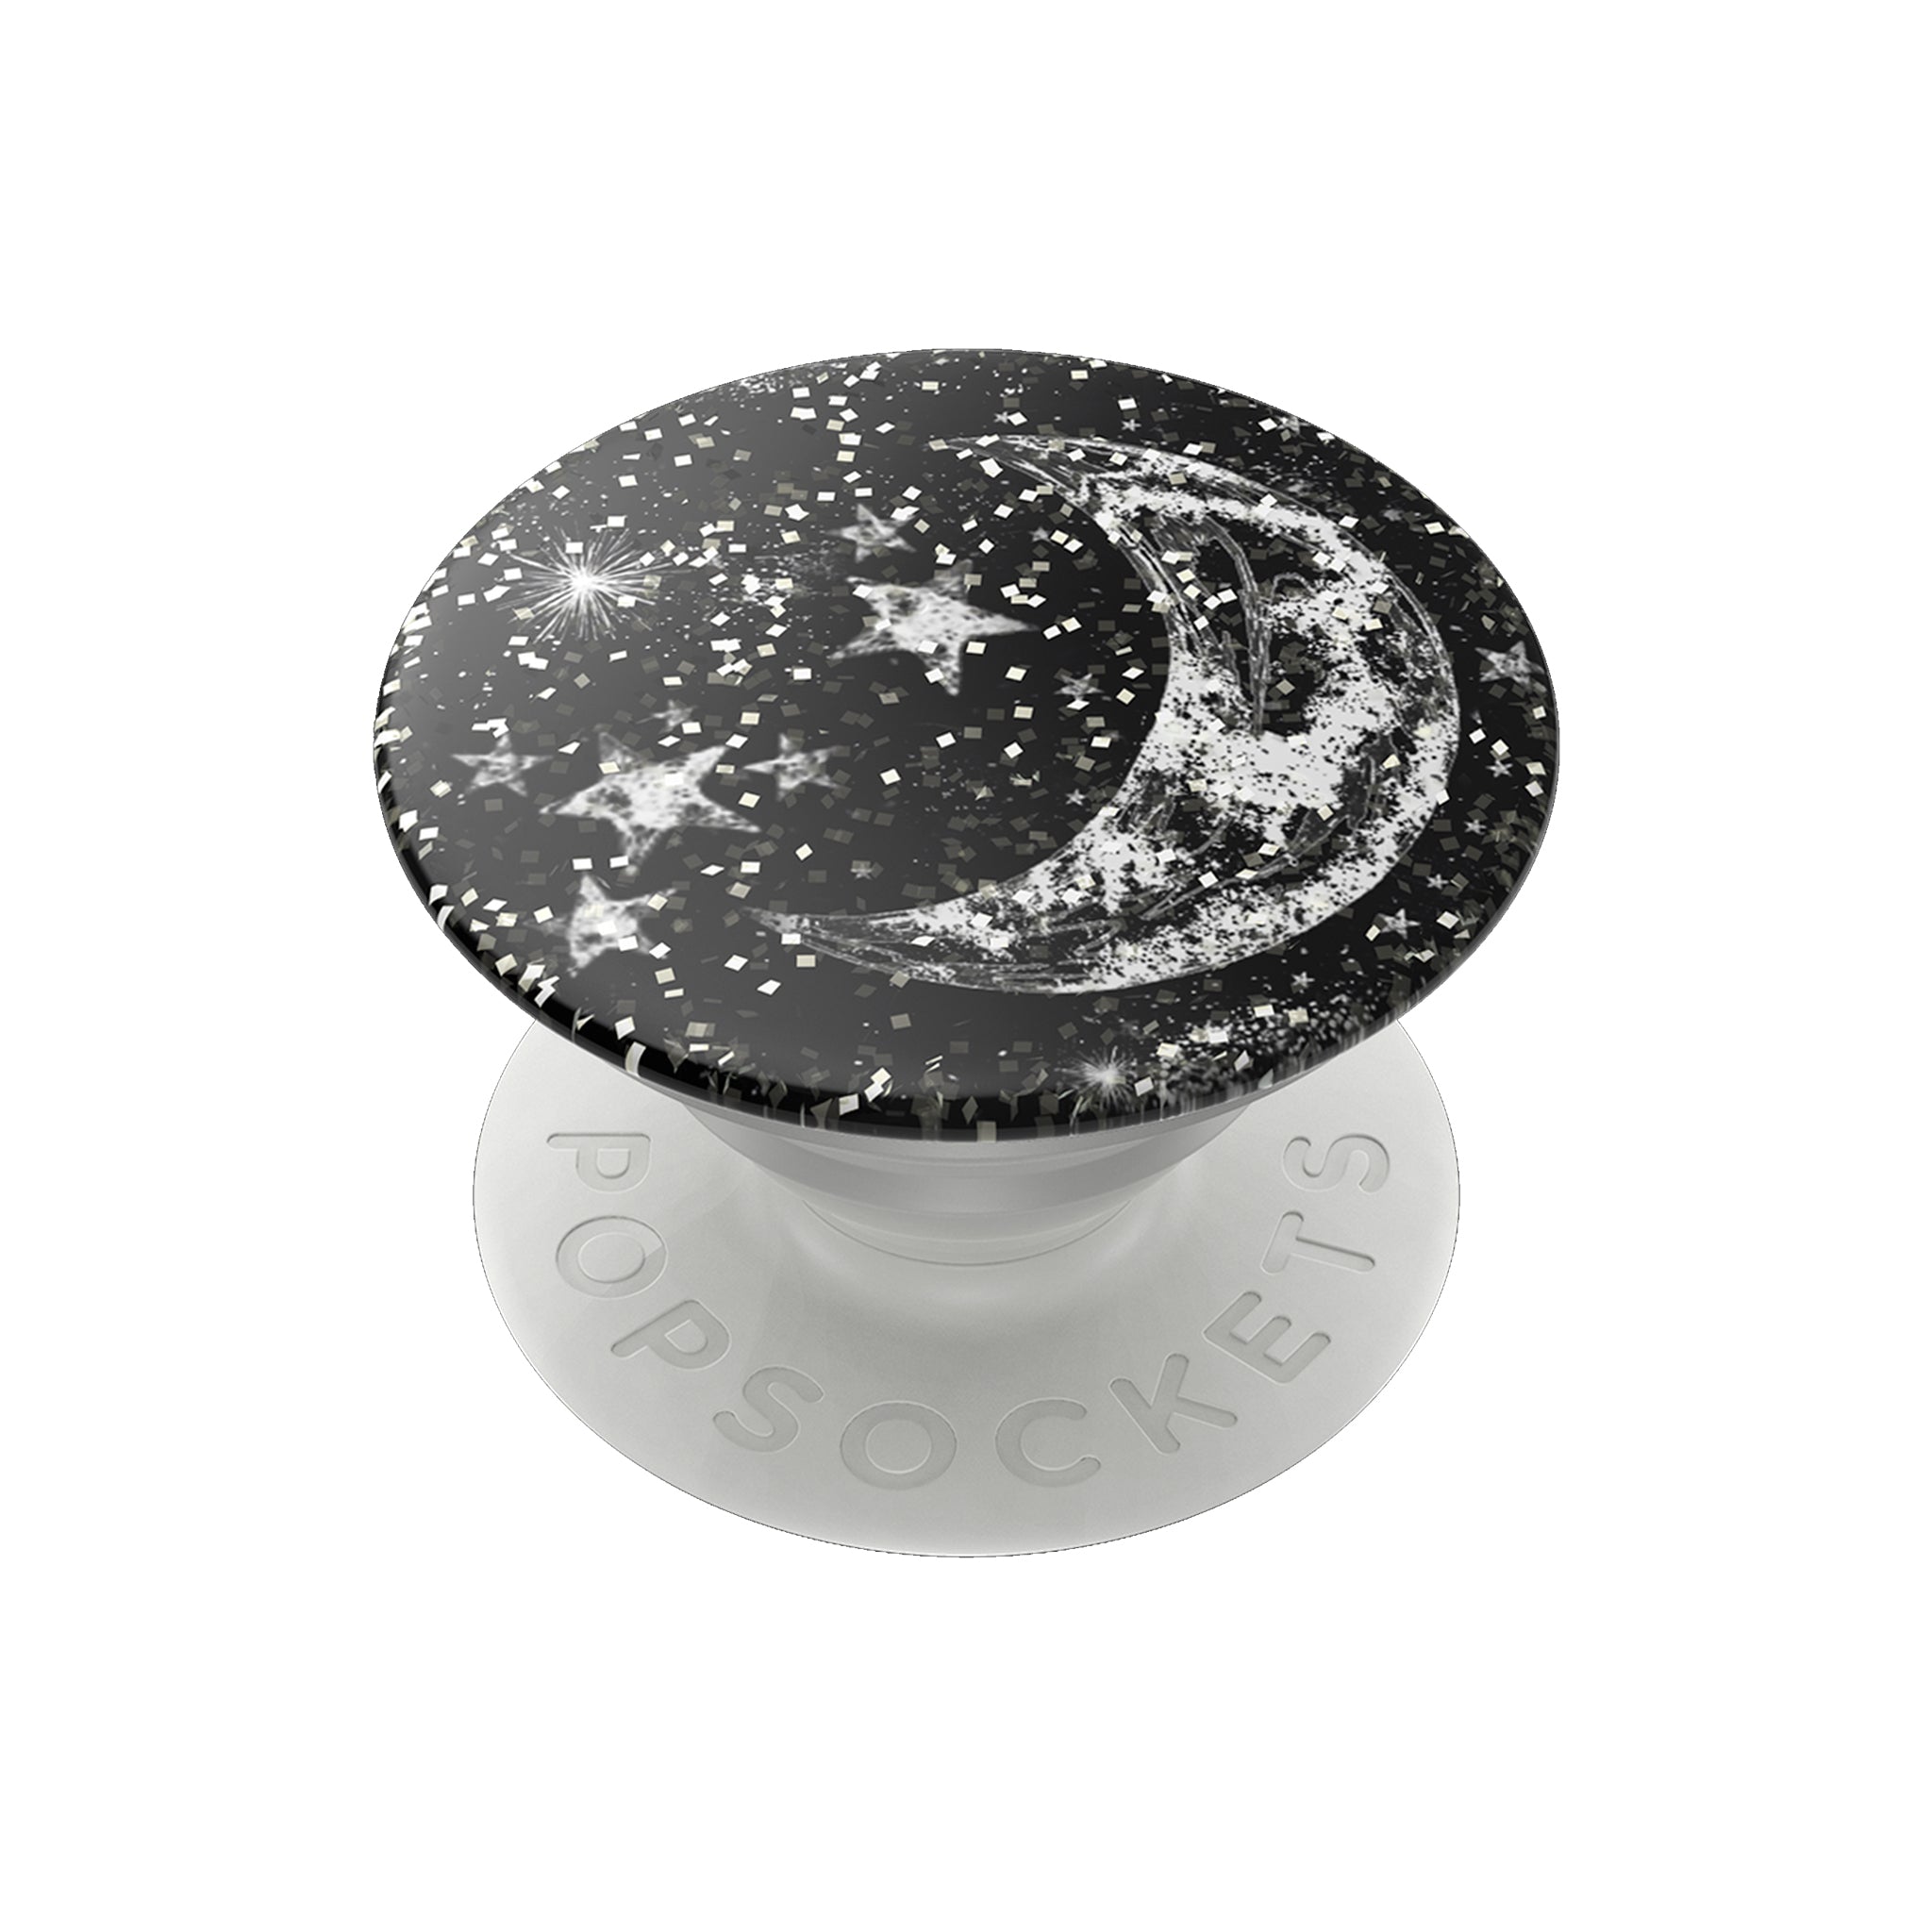 Popsockets - Popgrip Premium Swappable Device Stand And Grip - Glitter Moon Shadow